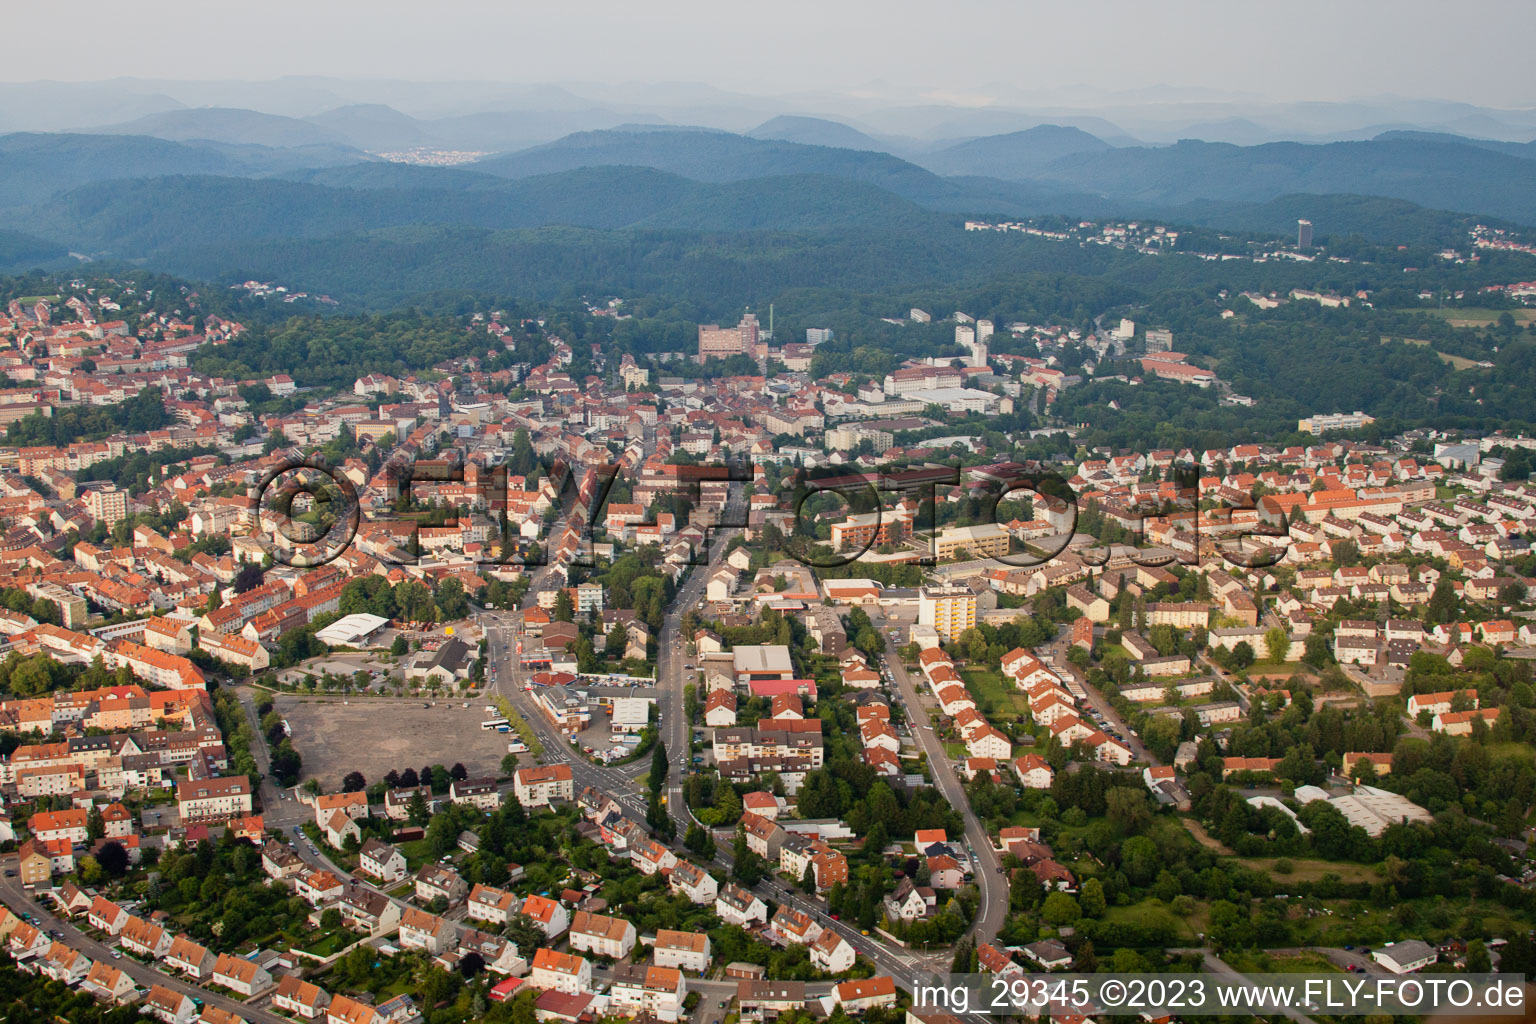 Drone recording of Pirmasens in the state Rhineland-Palatinate, Germany